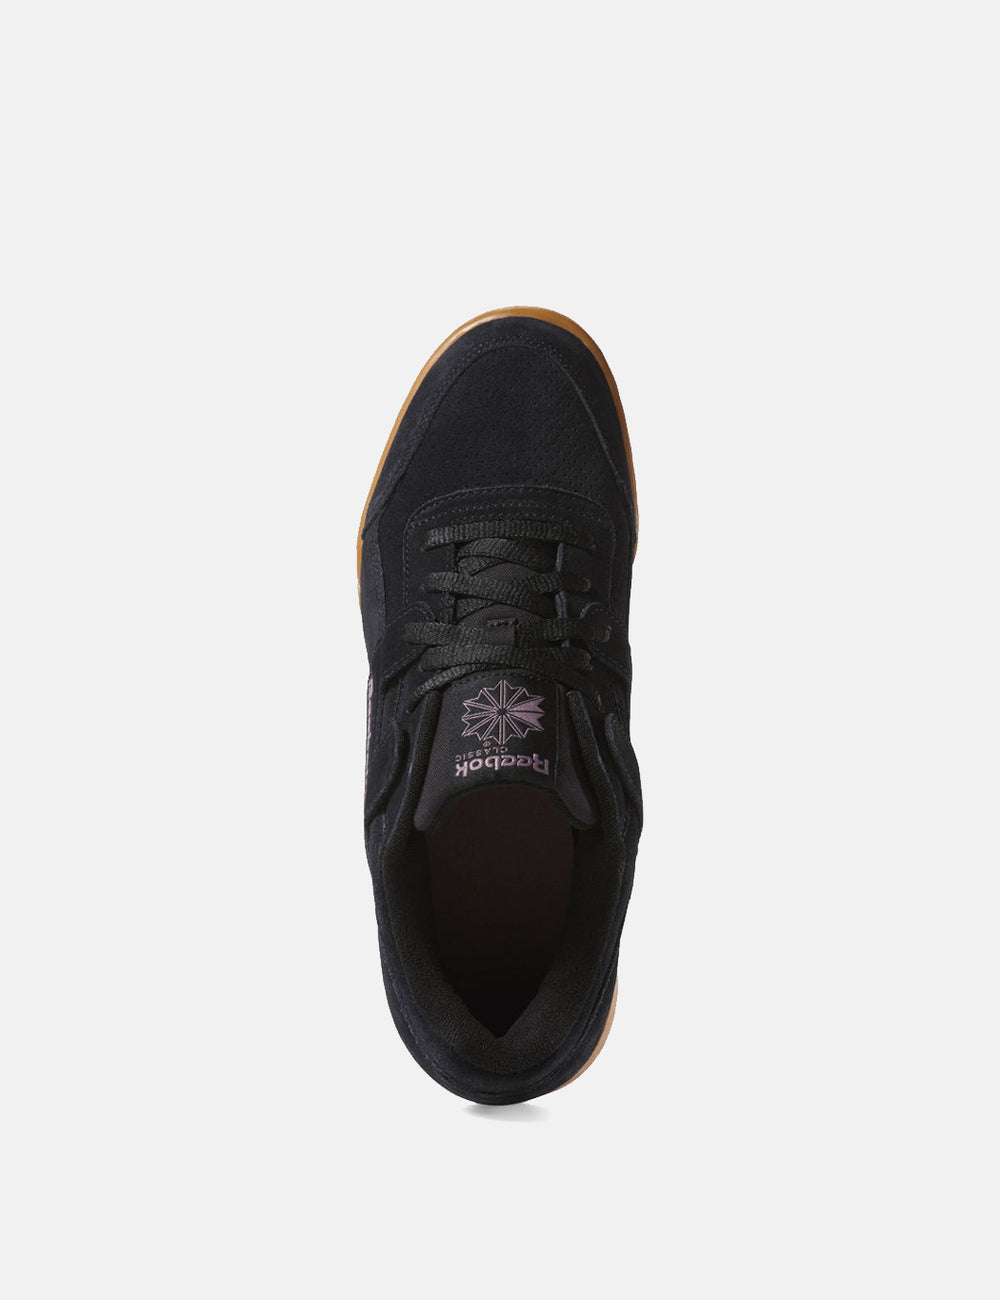 Kong Lear administration Halvtreds Reebok Workout Plus MU (DV4284) - Black/Noble Orchid I URBAN EXCESS.